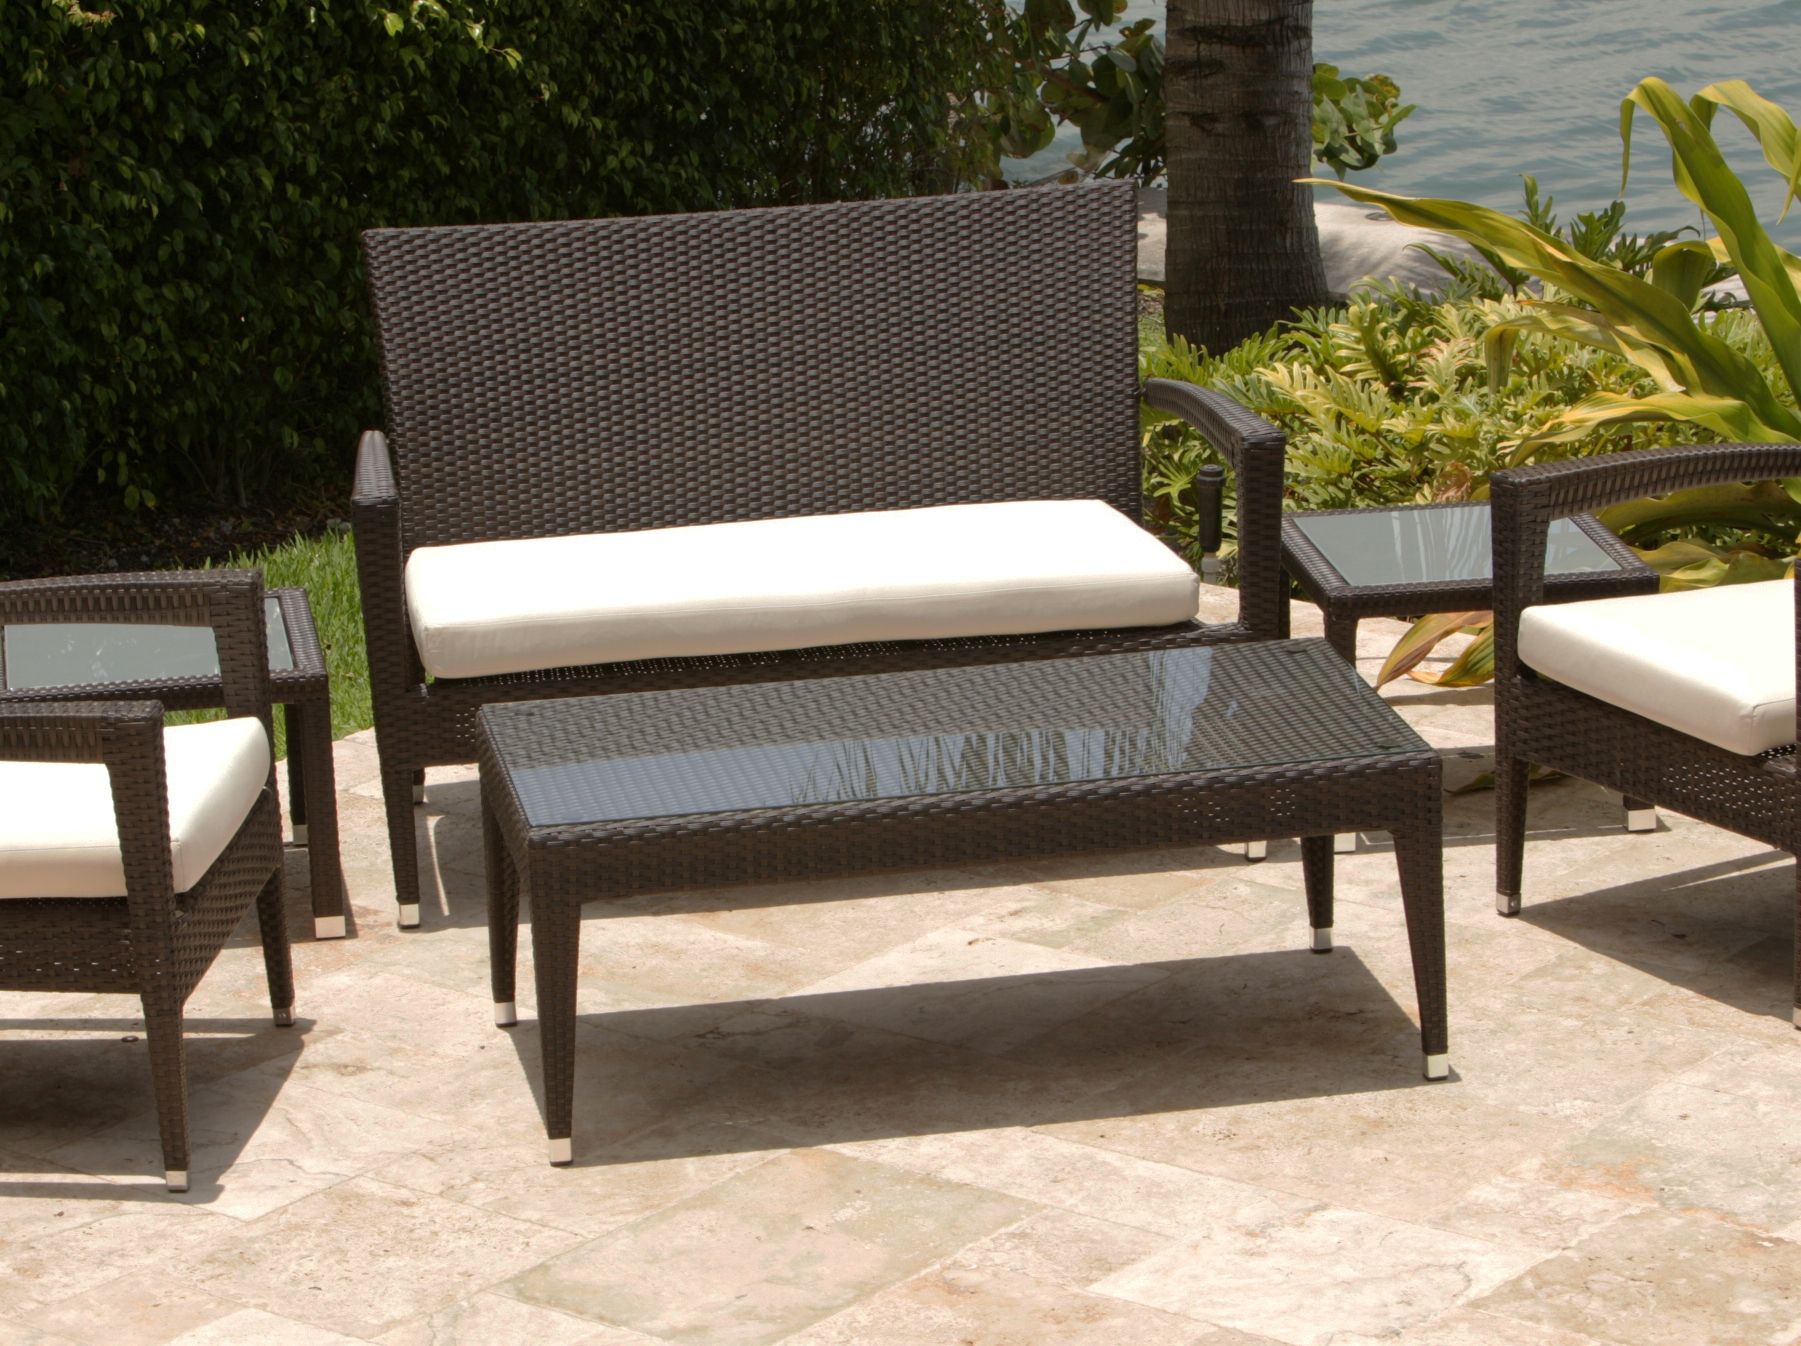 Strict Outdoor Rattan Coffee Table With Glass Top Inside 4pcs Rattan Patio Coffee Tables (Gallery 10 of 20)